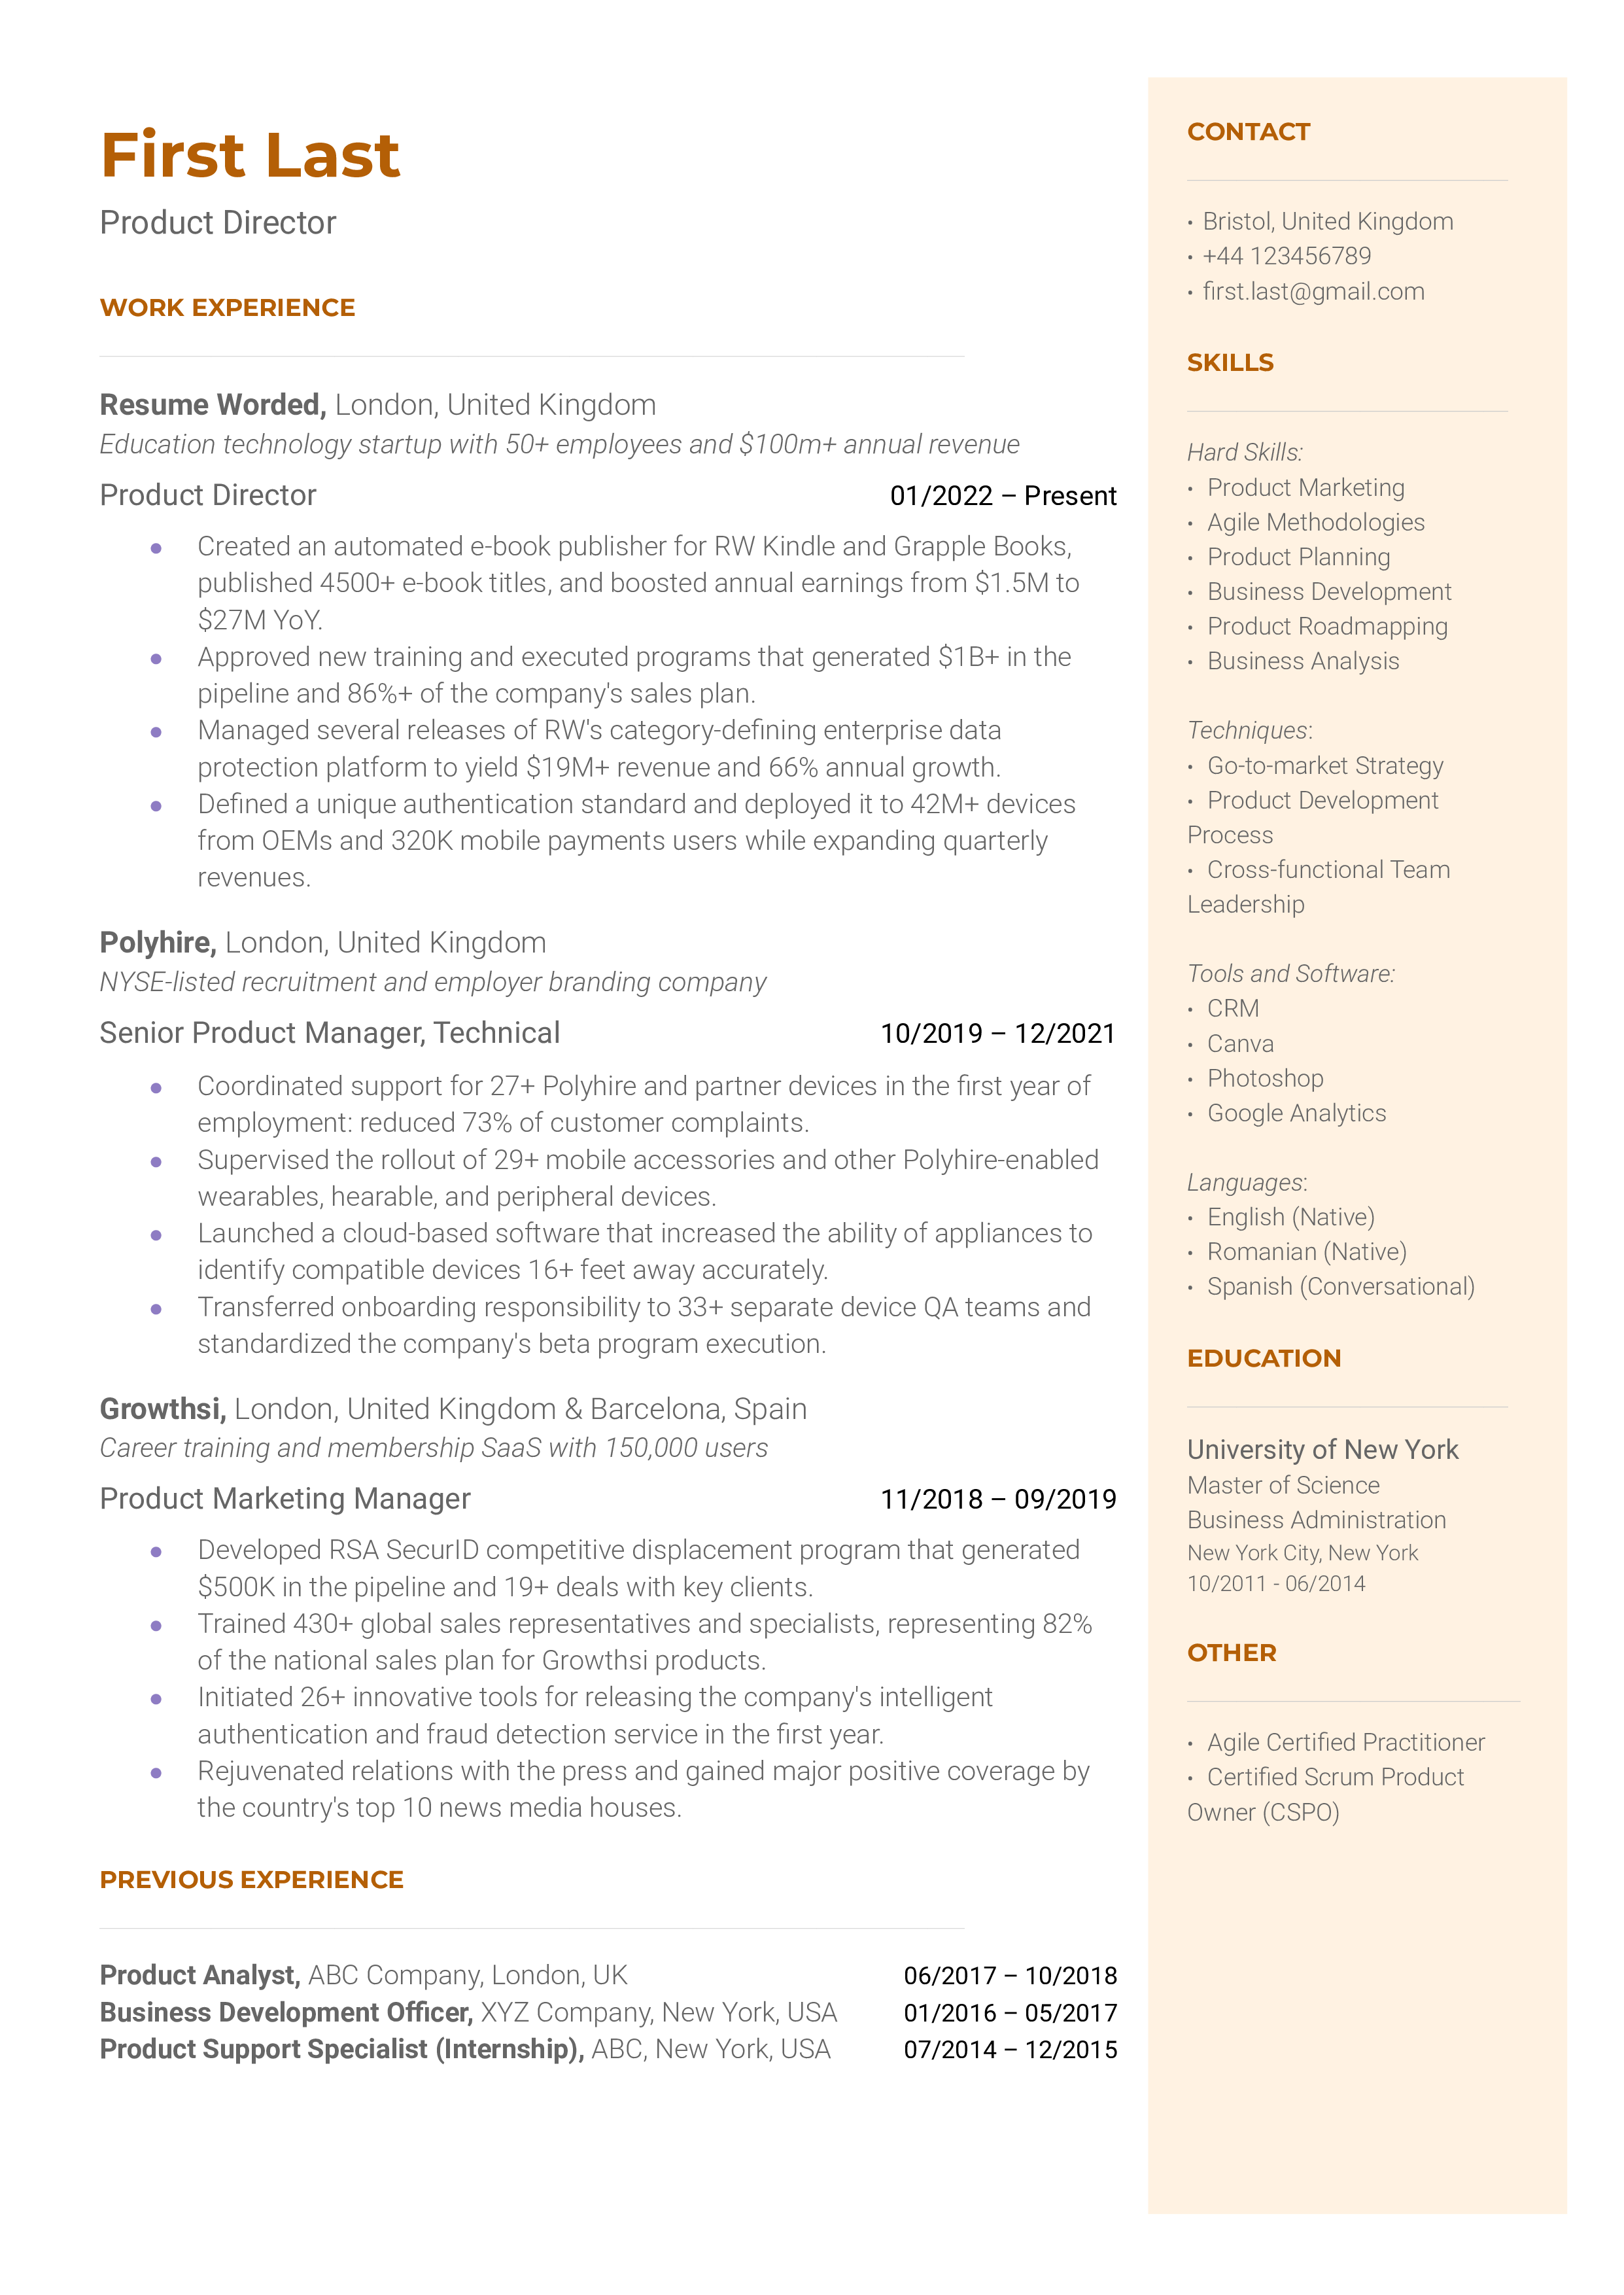 A neatly formatted CV showcasing skills and experiences relevant for a Product Director role.